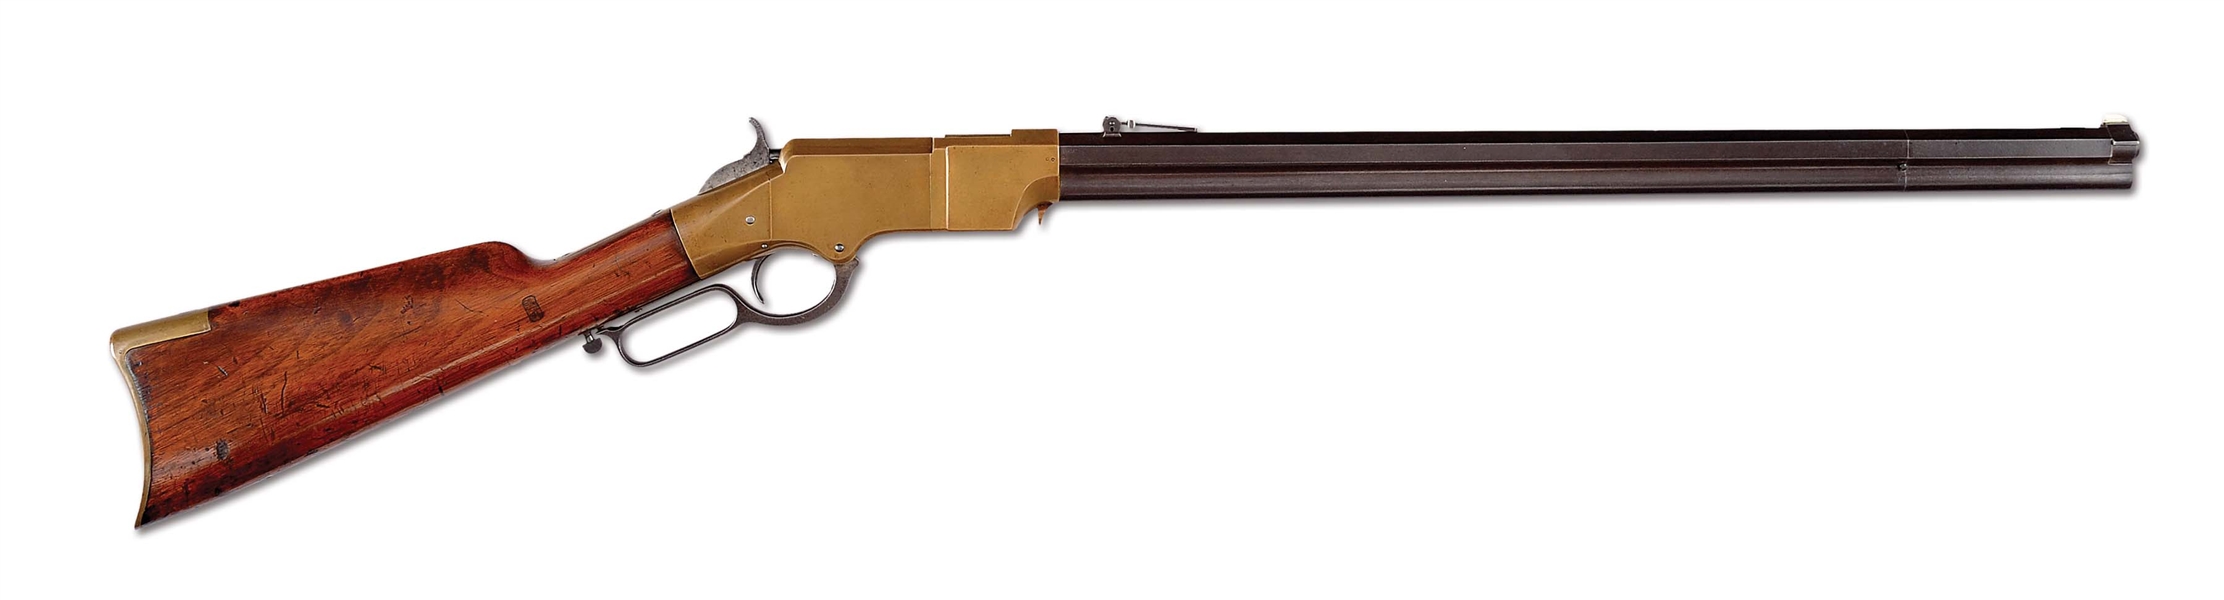 (A) SUPERB MARTIALLY MARKED HENRY RIFLE. 